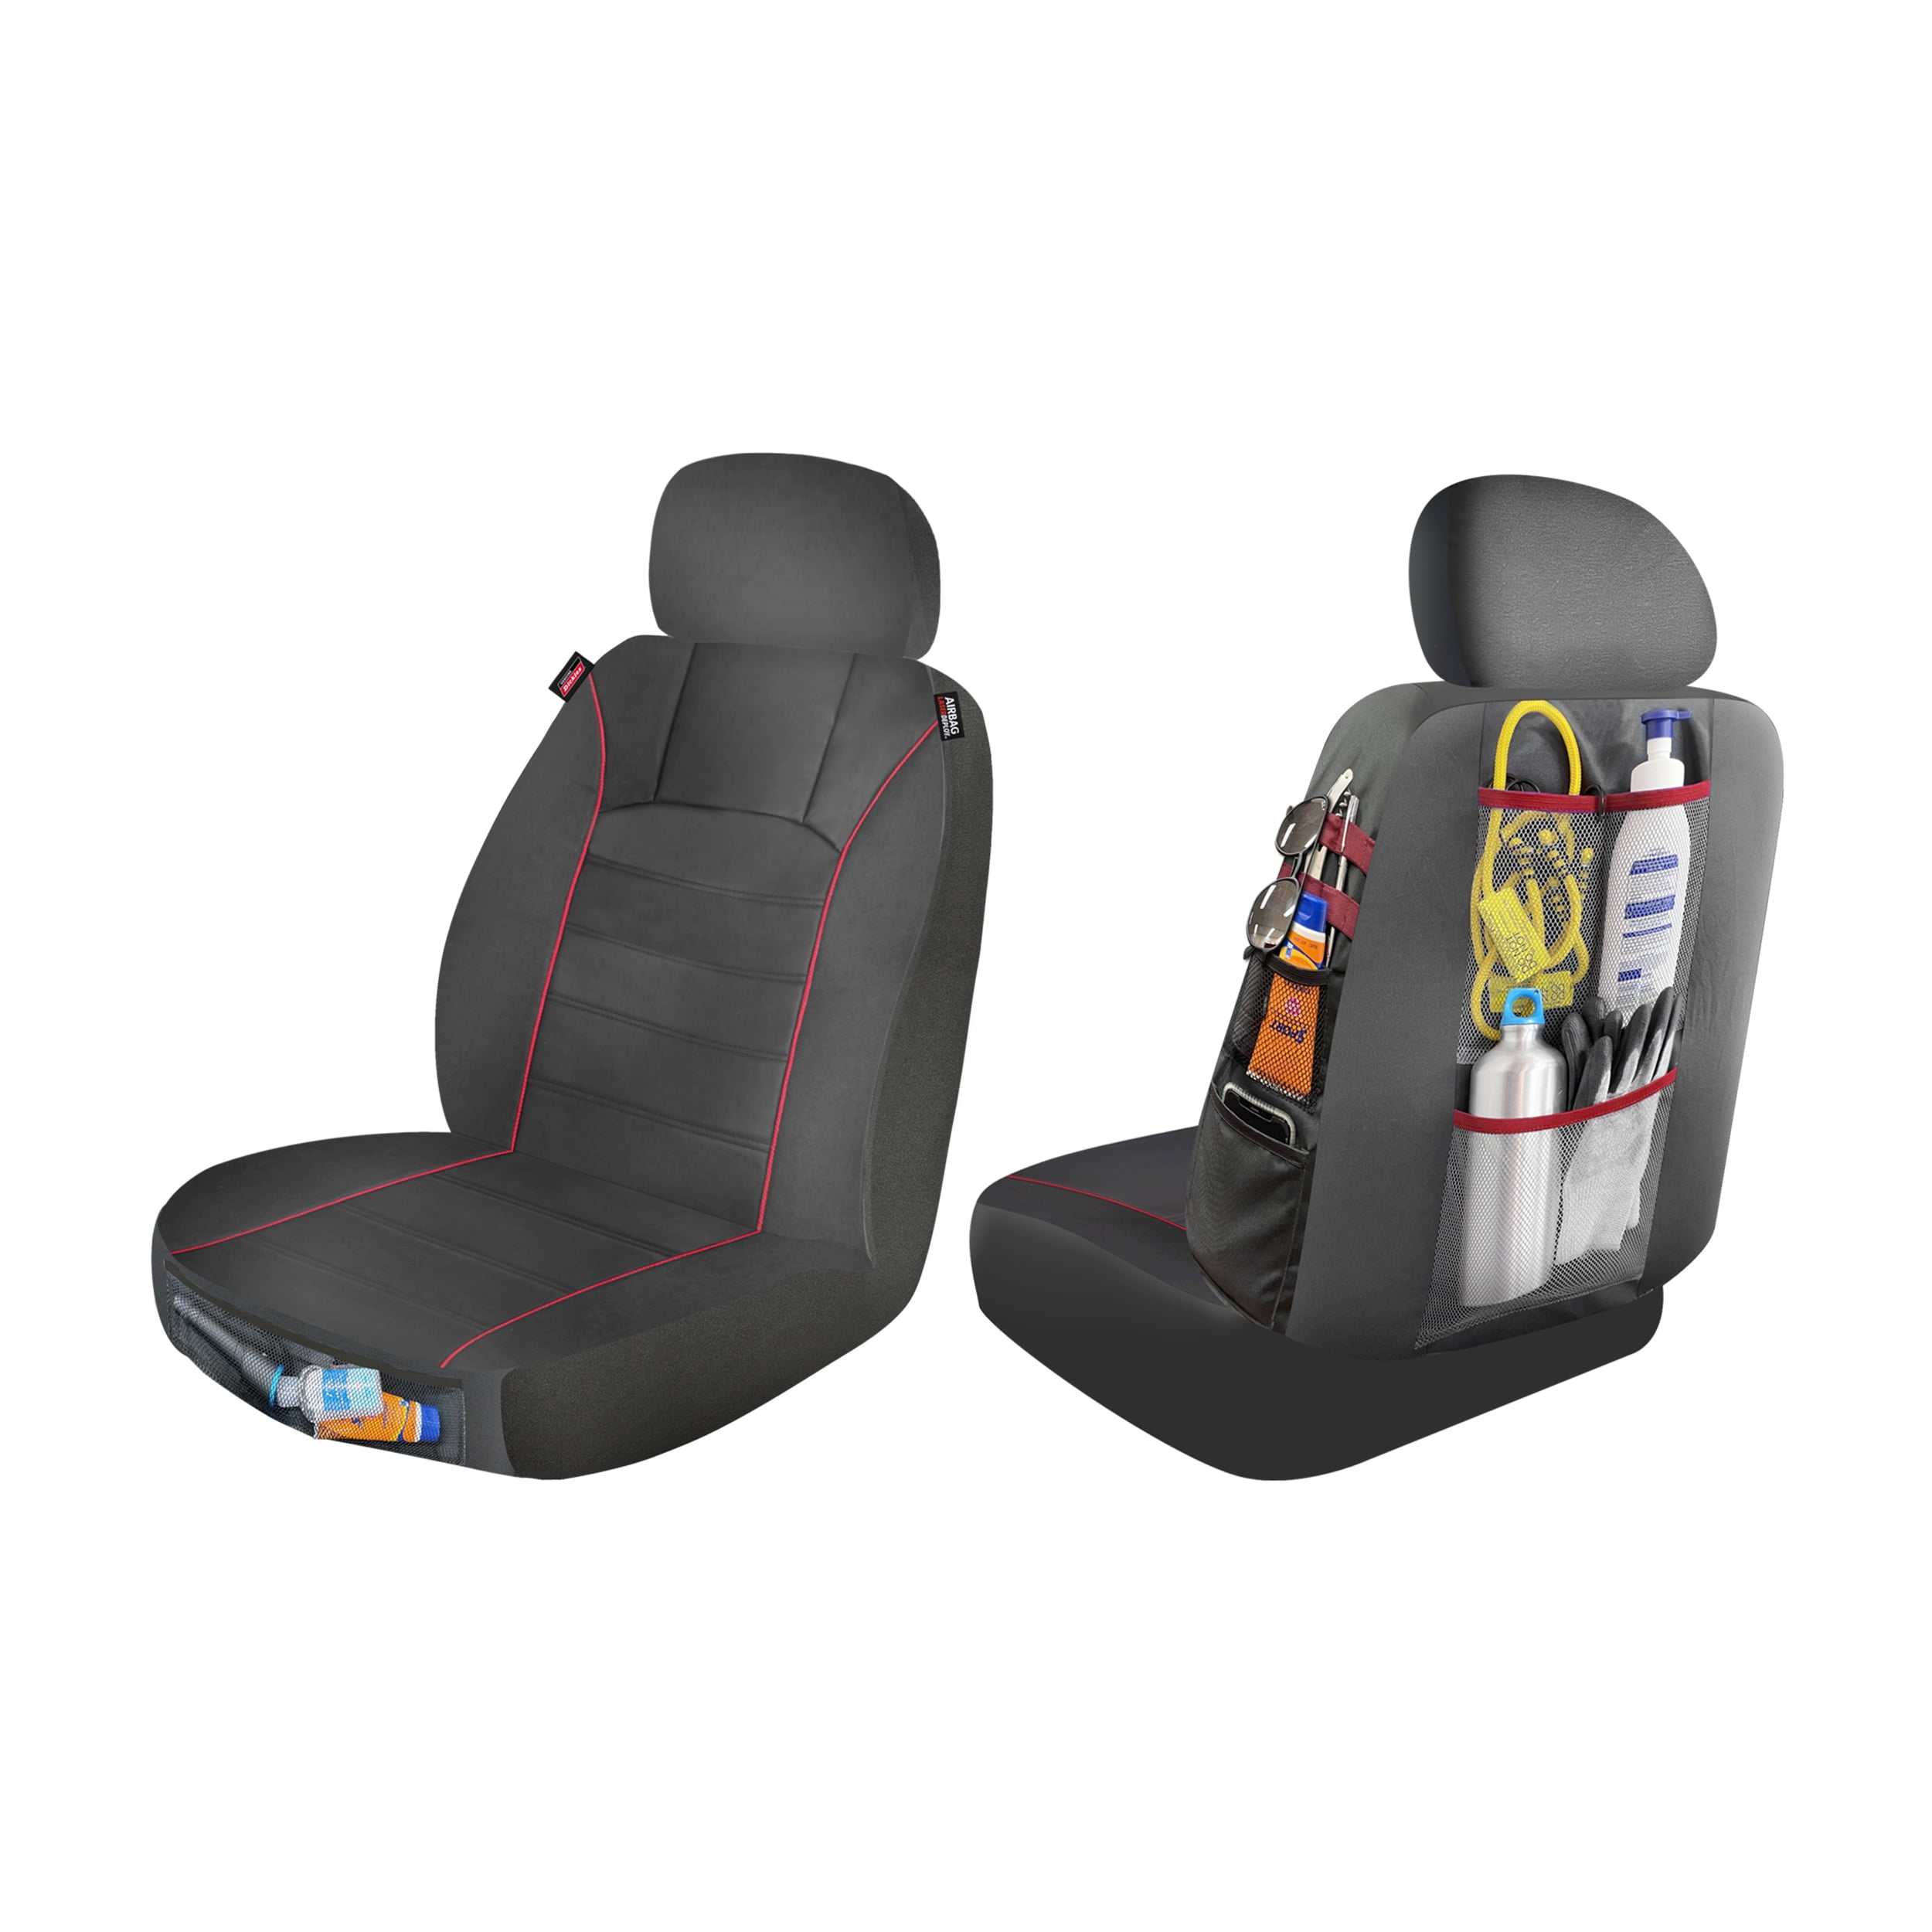 05 on SUZUKI CARRY FRONT LEATHER LOOK PAIR CAR SEAT COVER SET 